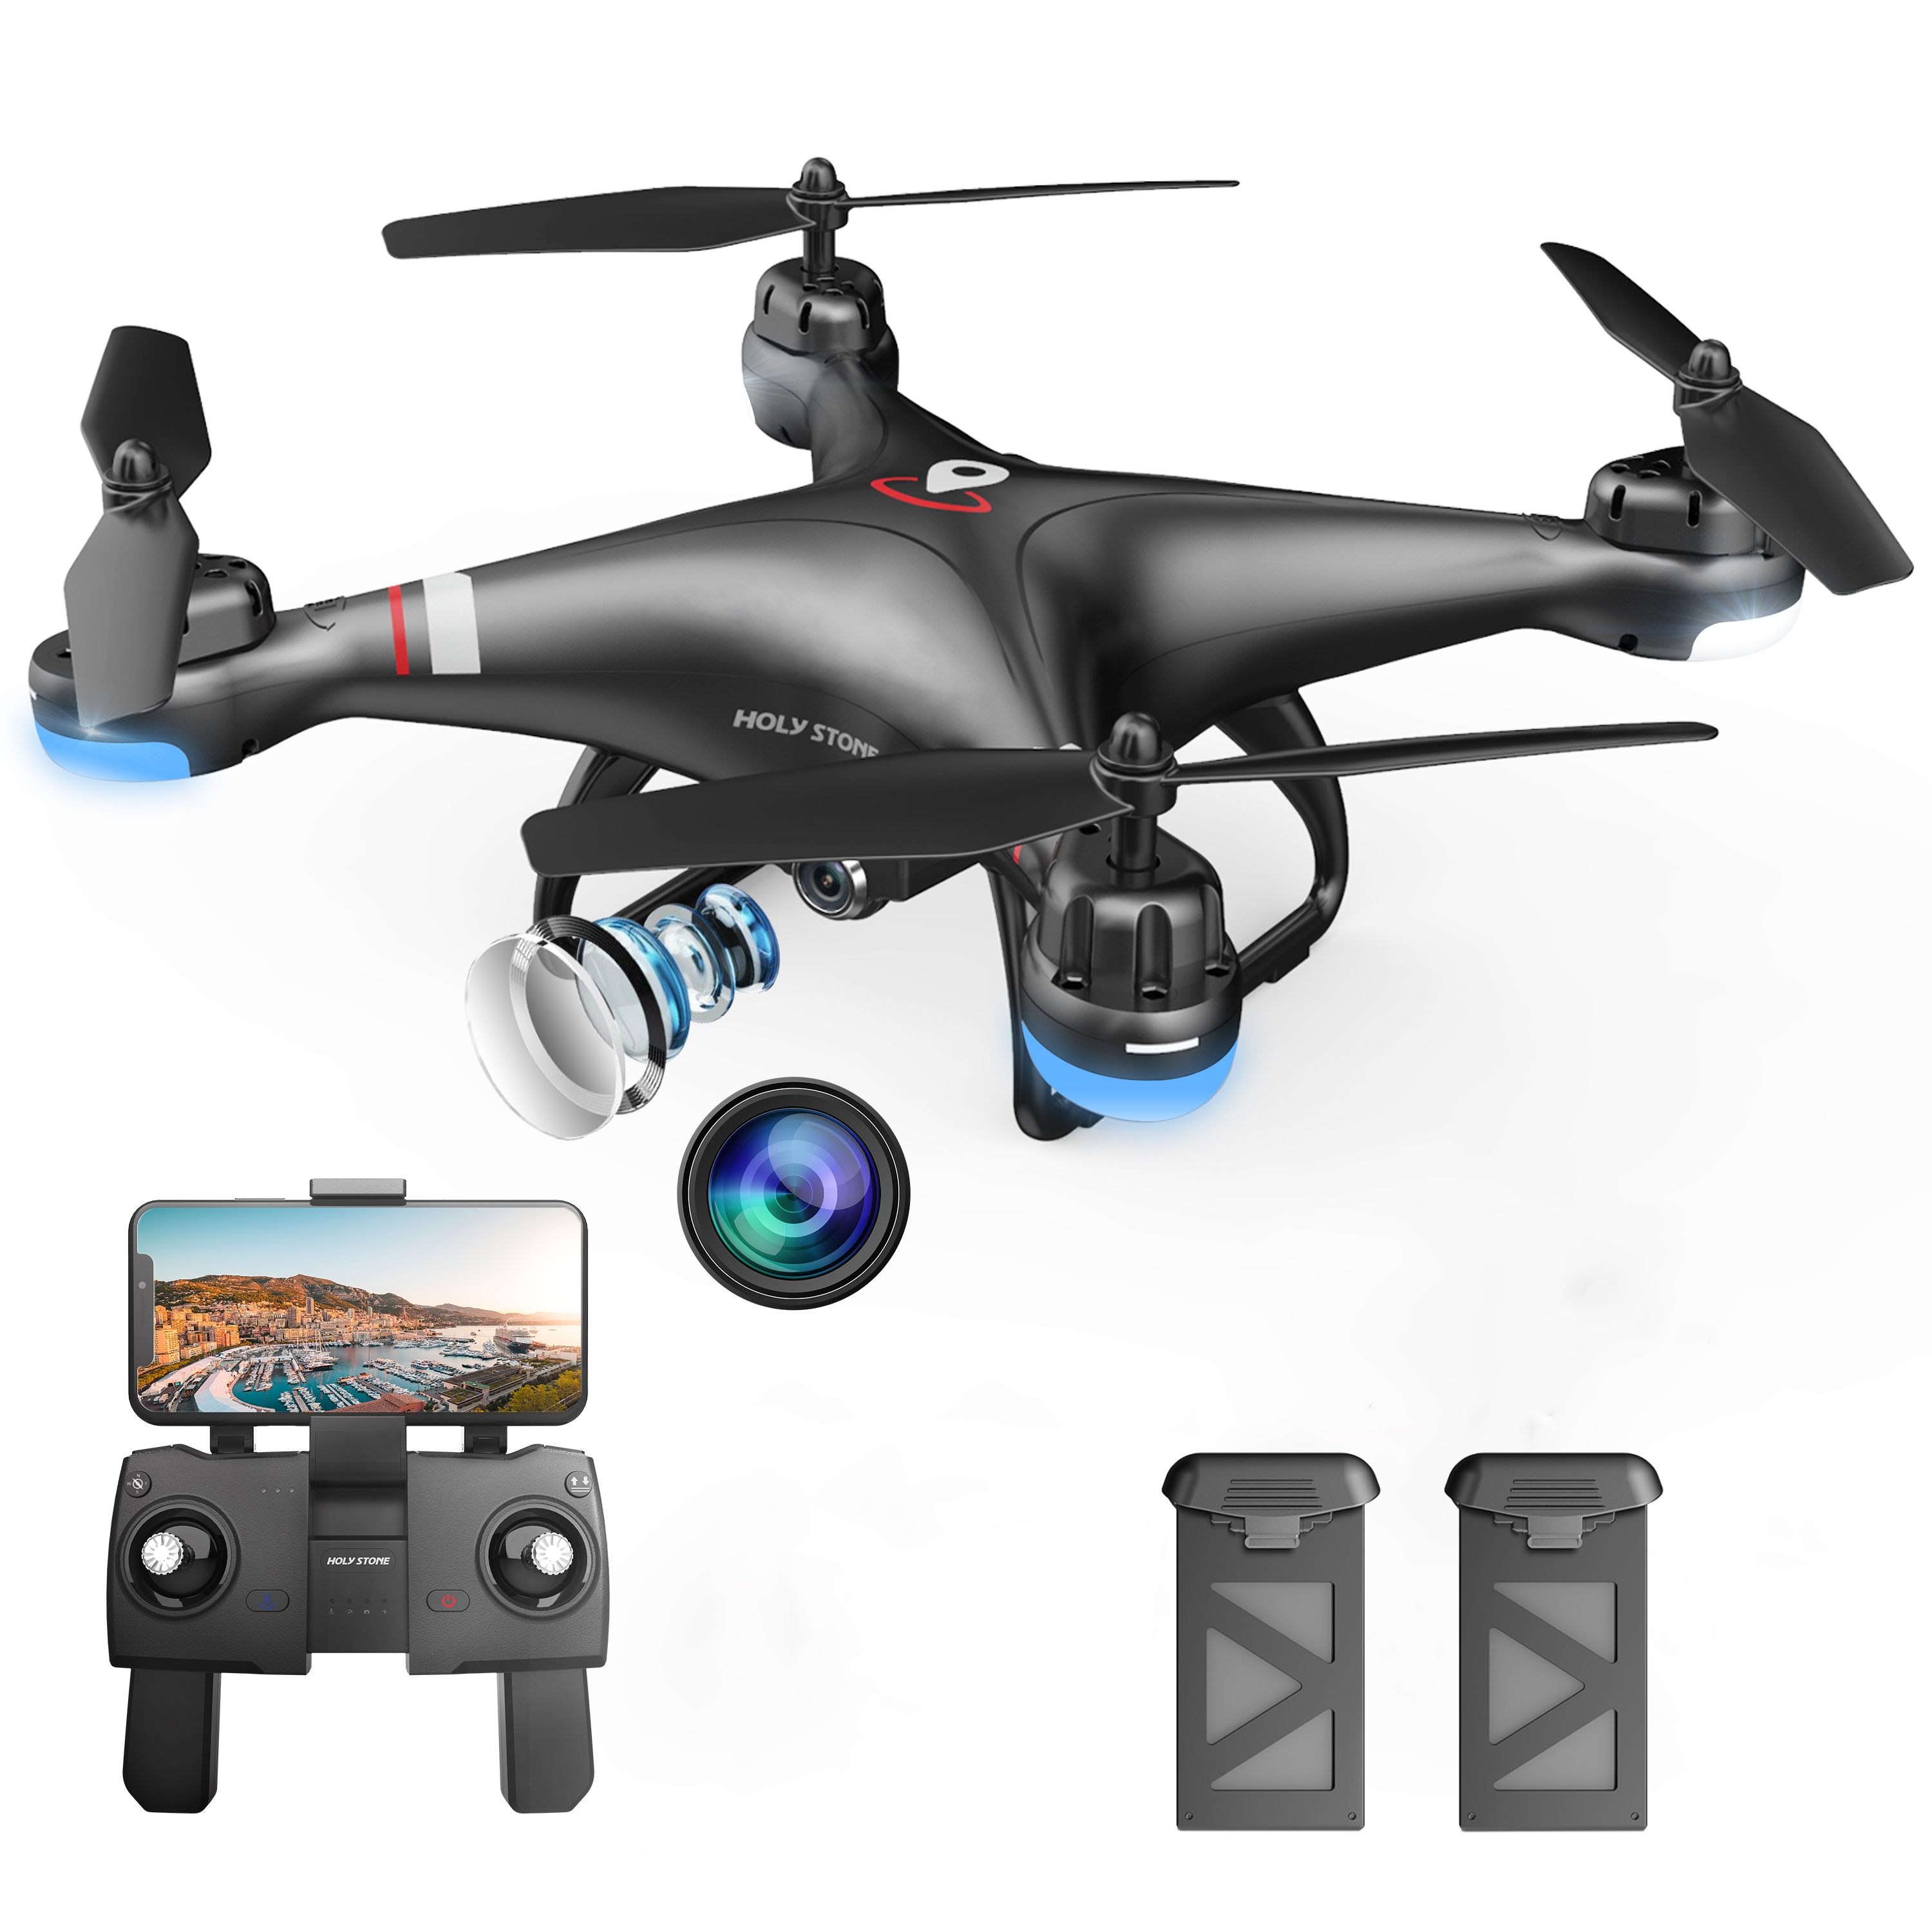 Holy Stone HS110G GPS Drone with 1080P Camera for Adults and Beginners  Follow Me Auto Return Home Batteries double the Flight Time